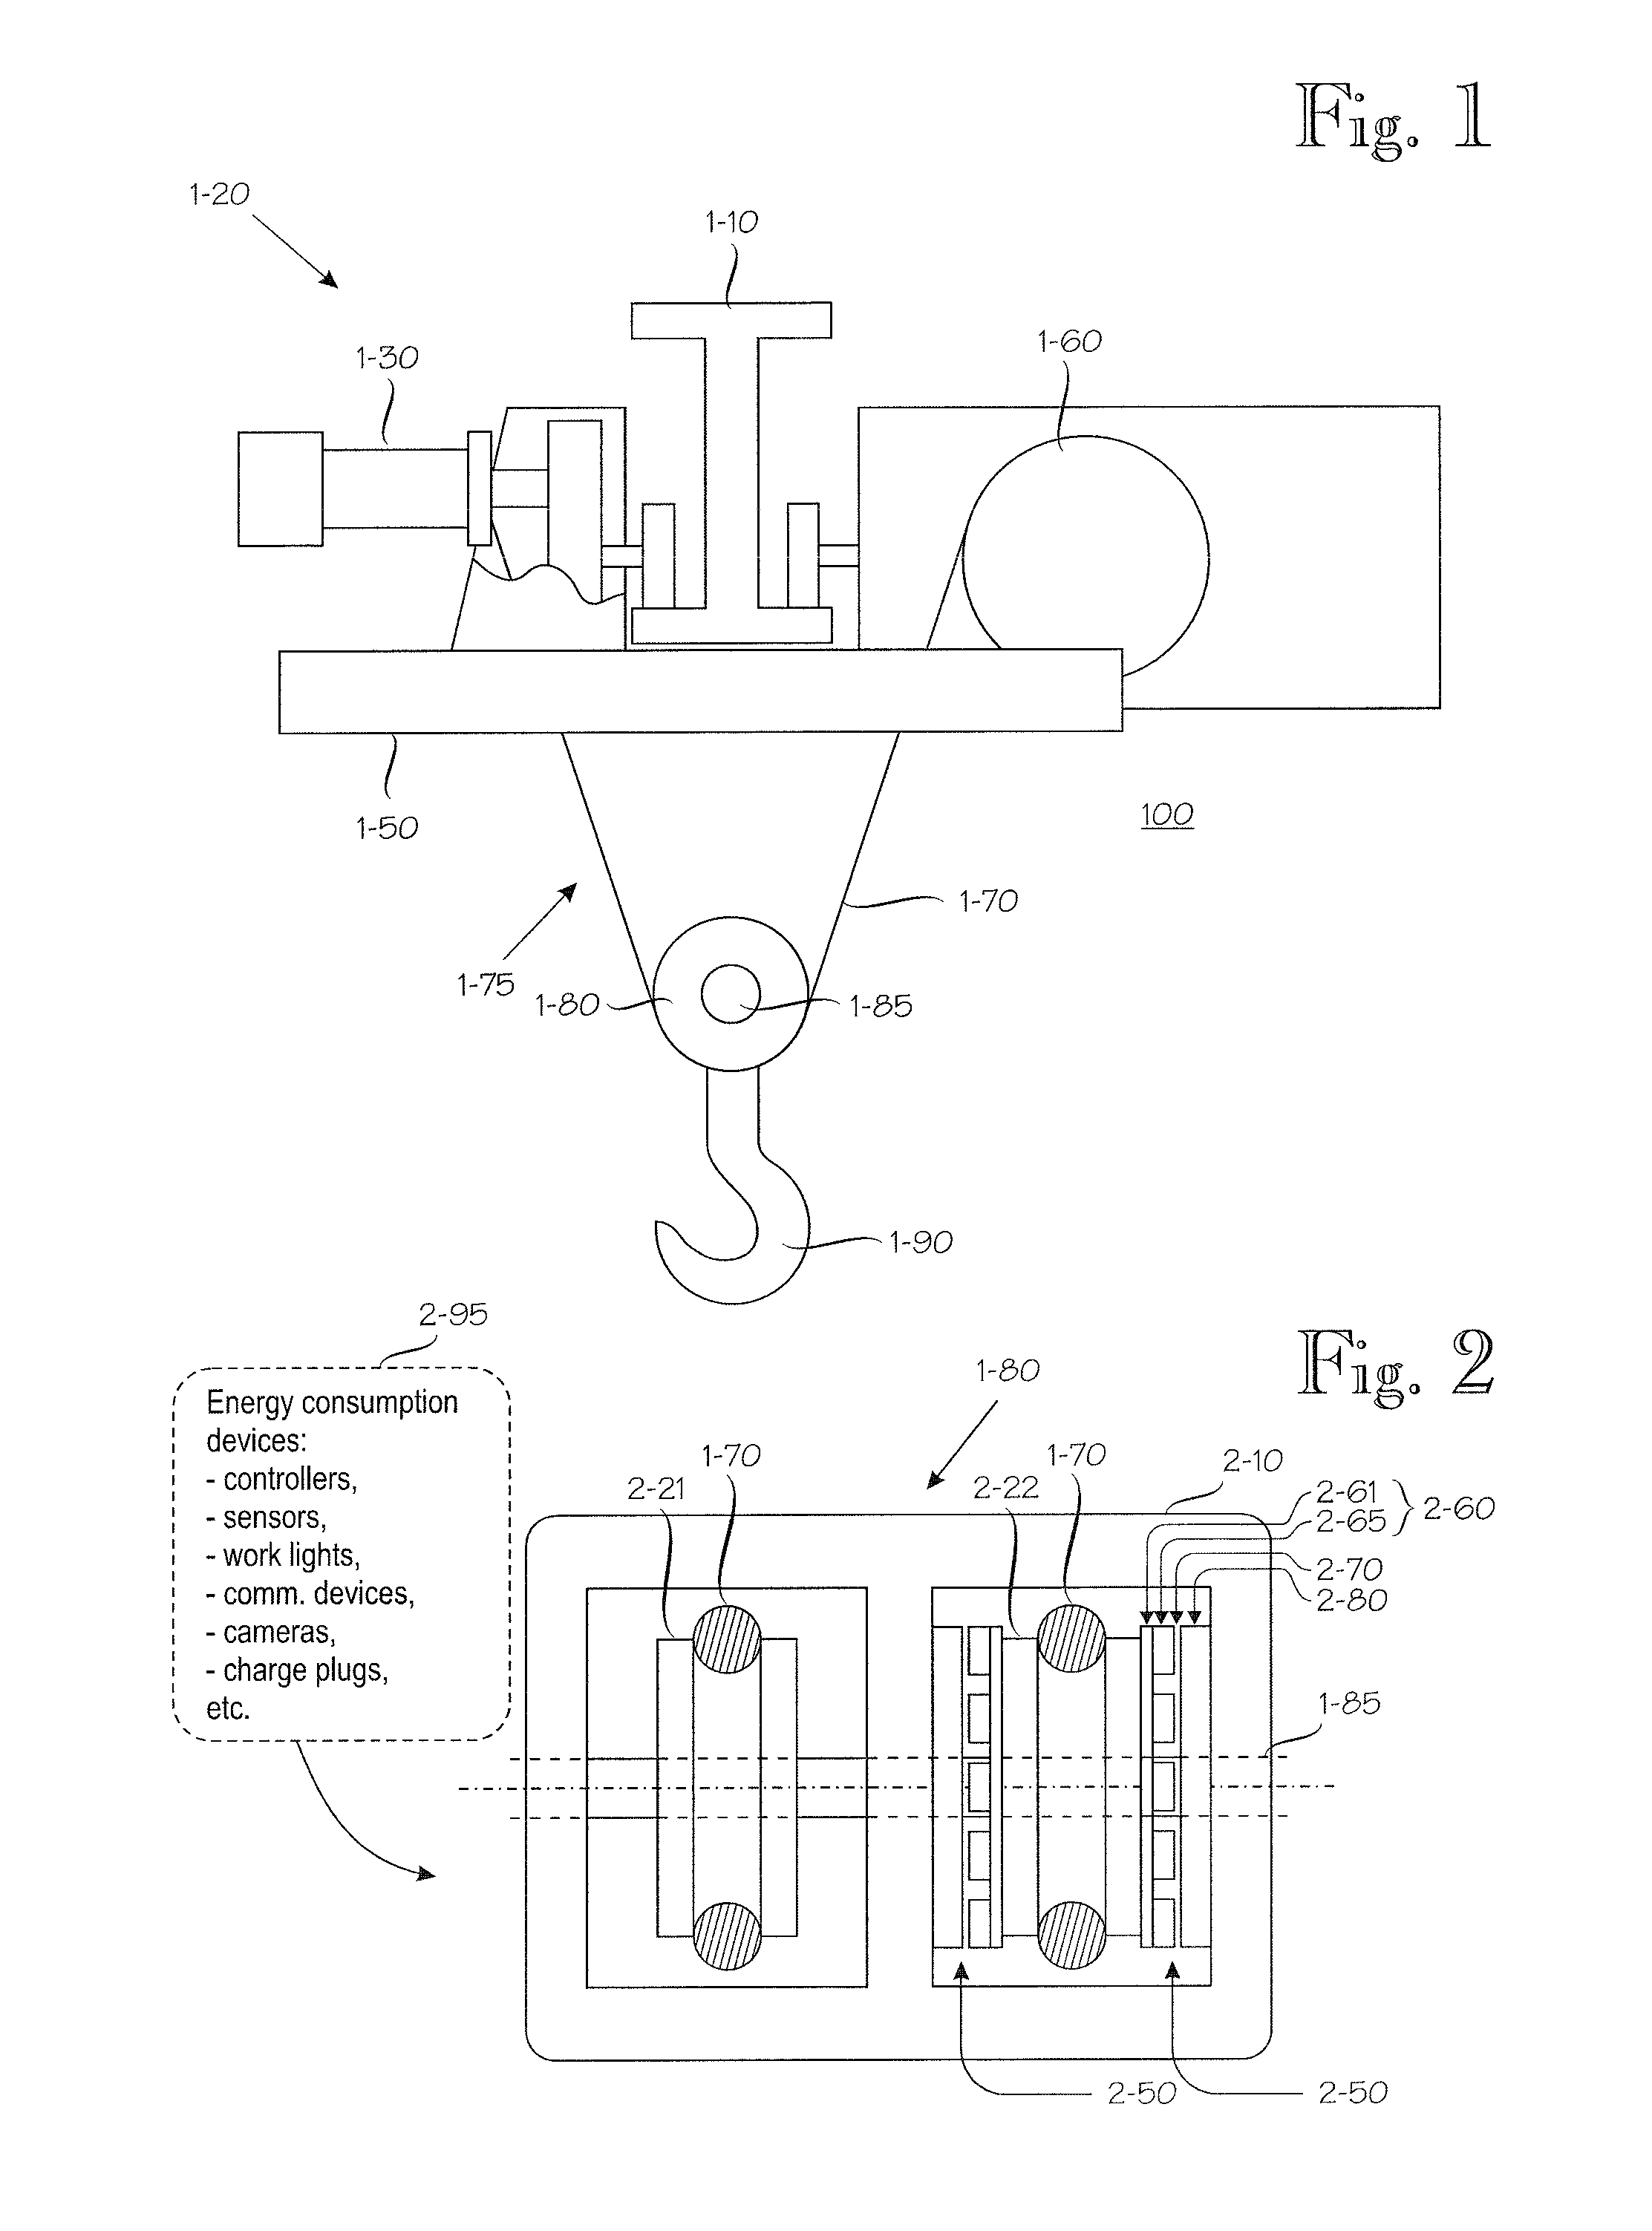 Apparatus and method in connection with crane sheave